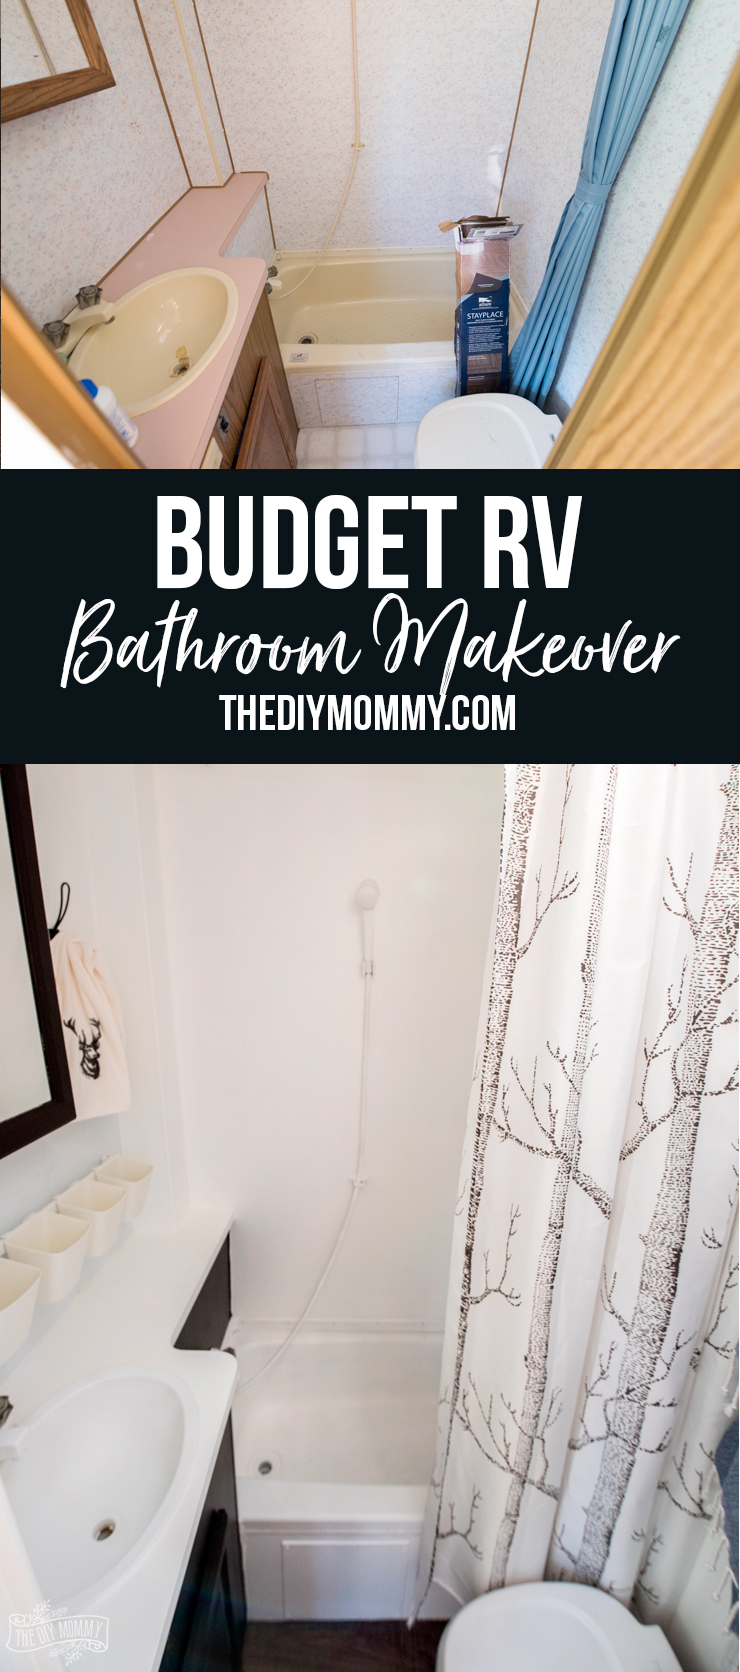 RV bathroom makeover on a budget - great ideas!